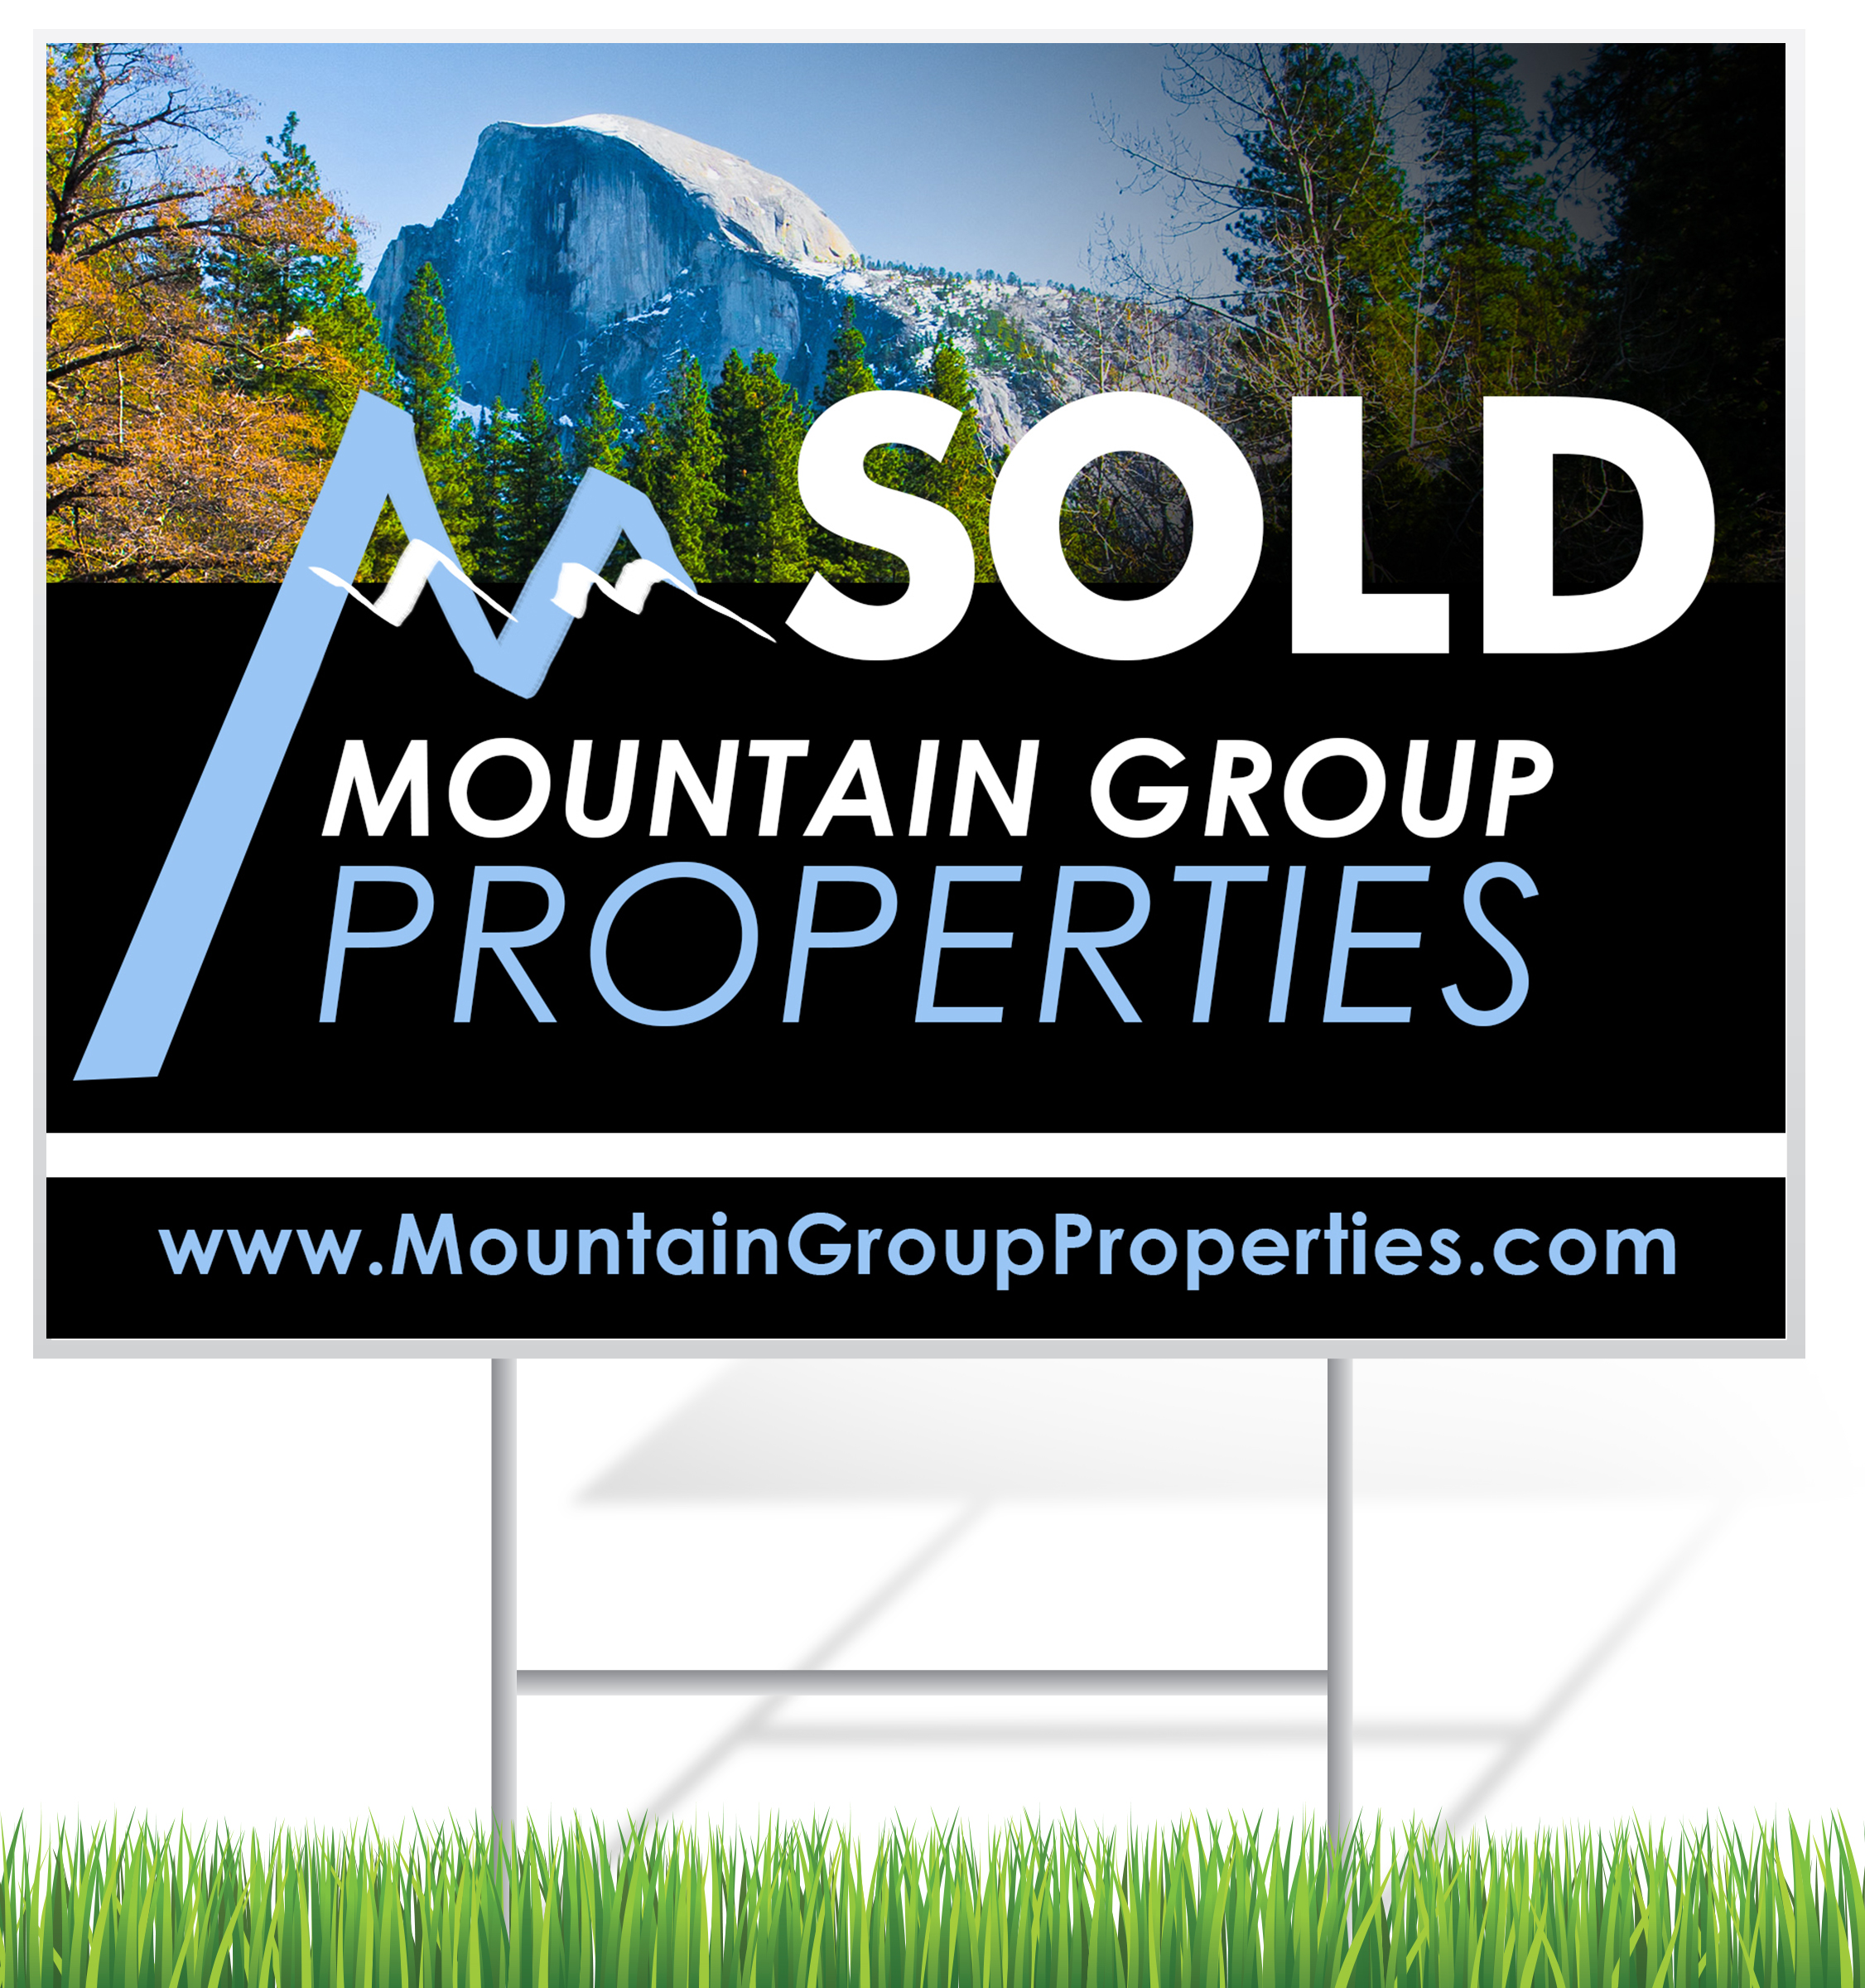 Sold Lawn Sign Example | LawnSigns.com